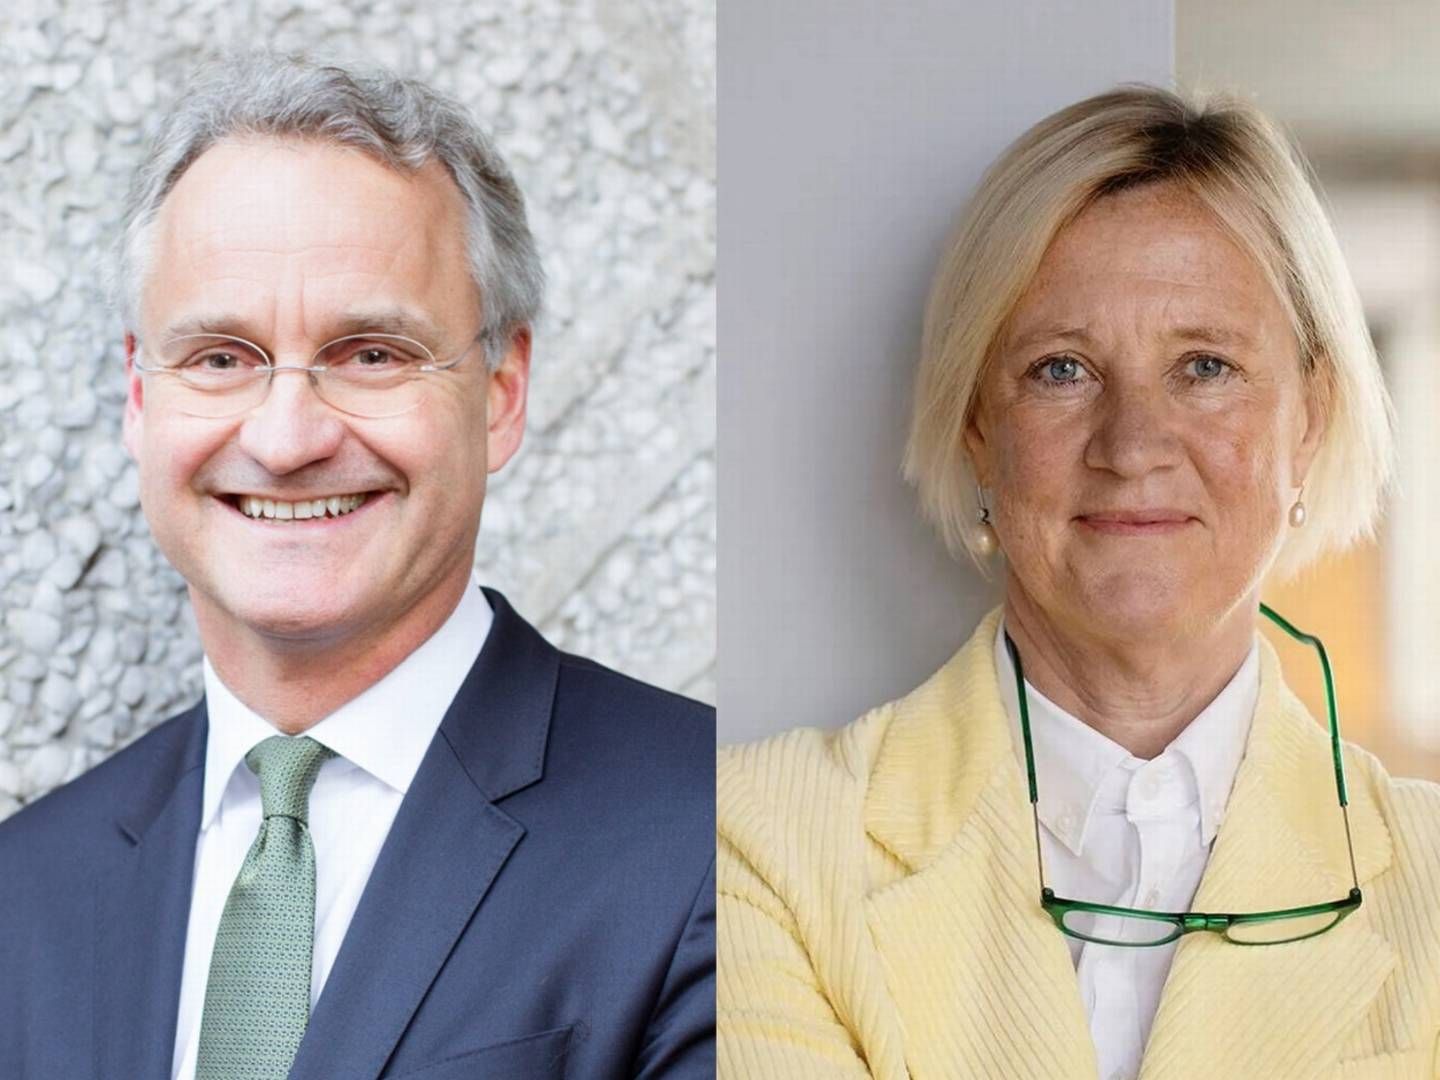 The view, published in Alecta’s annual report Friday, extends to Chief Executive Officer Peder Hasslev and his predecessor, Magnus Billing, as well as former chairman Ingrid Bonde. | Photo: PR / Alecta